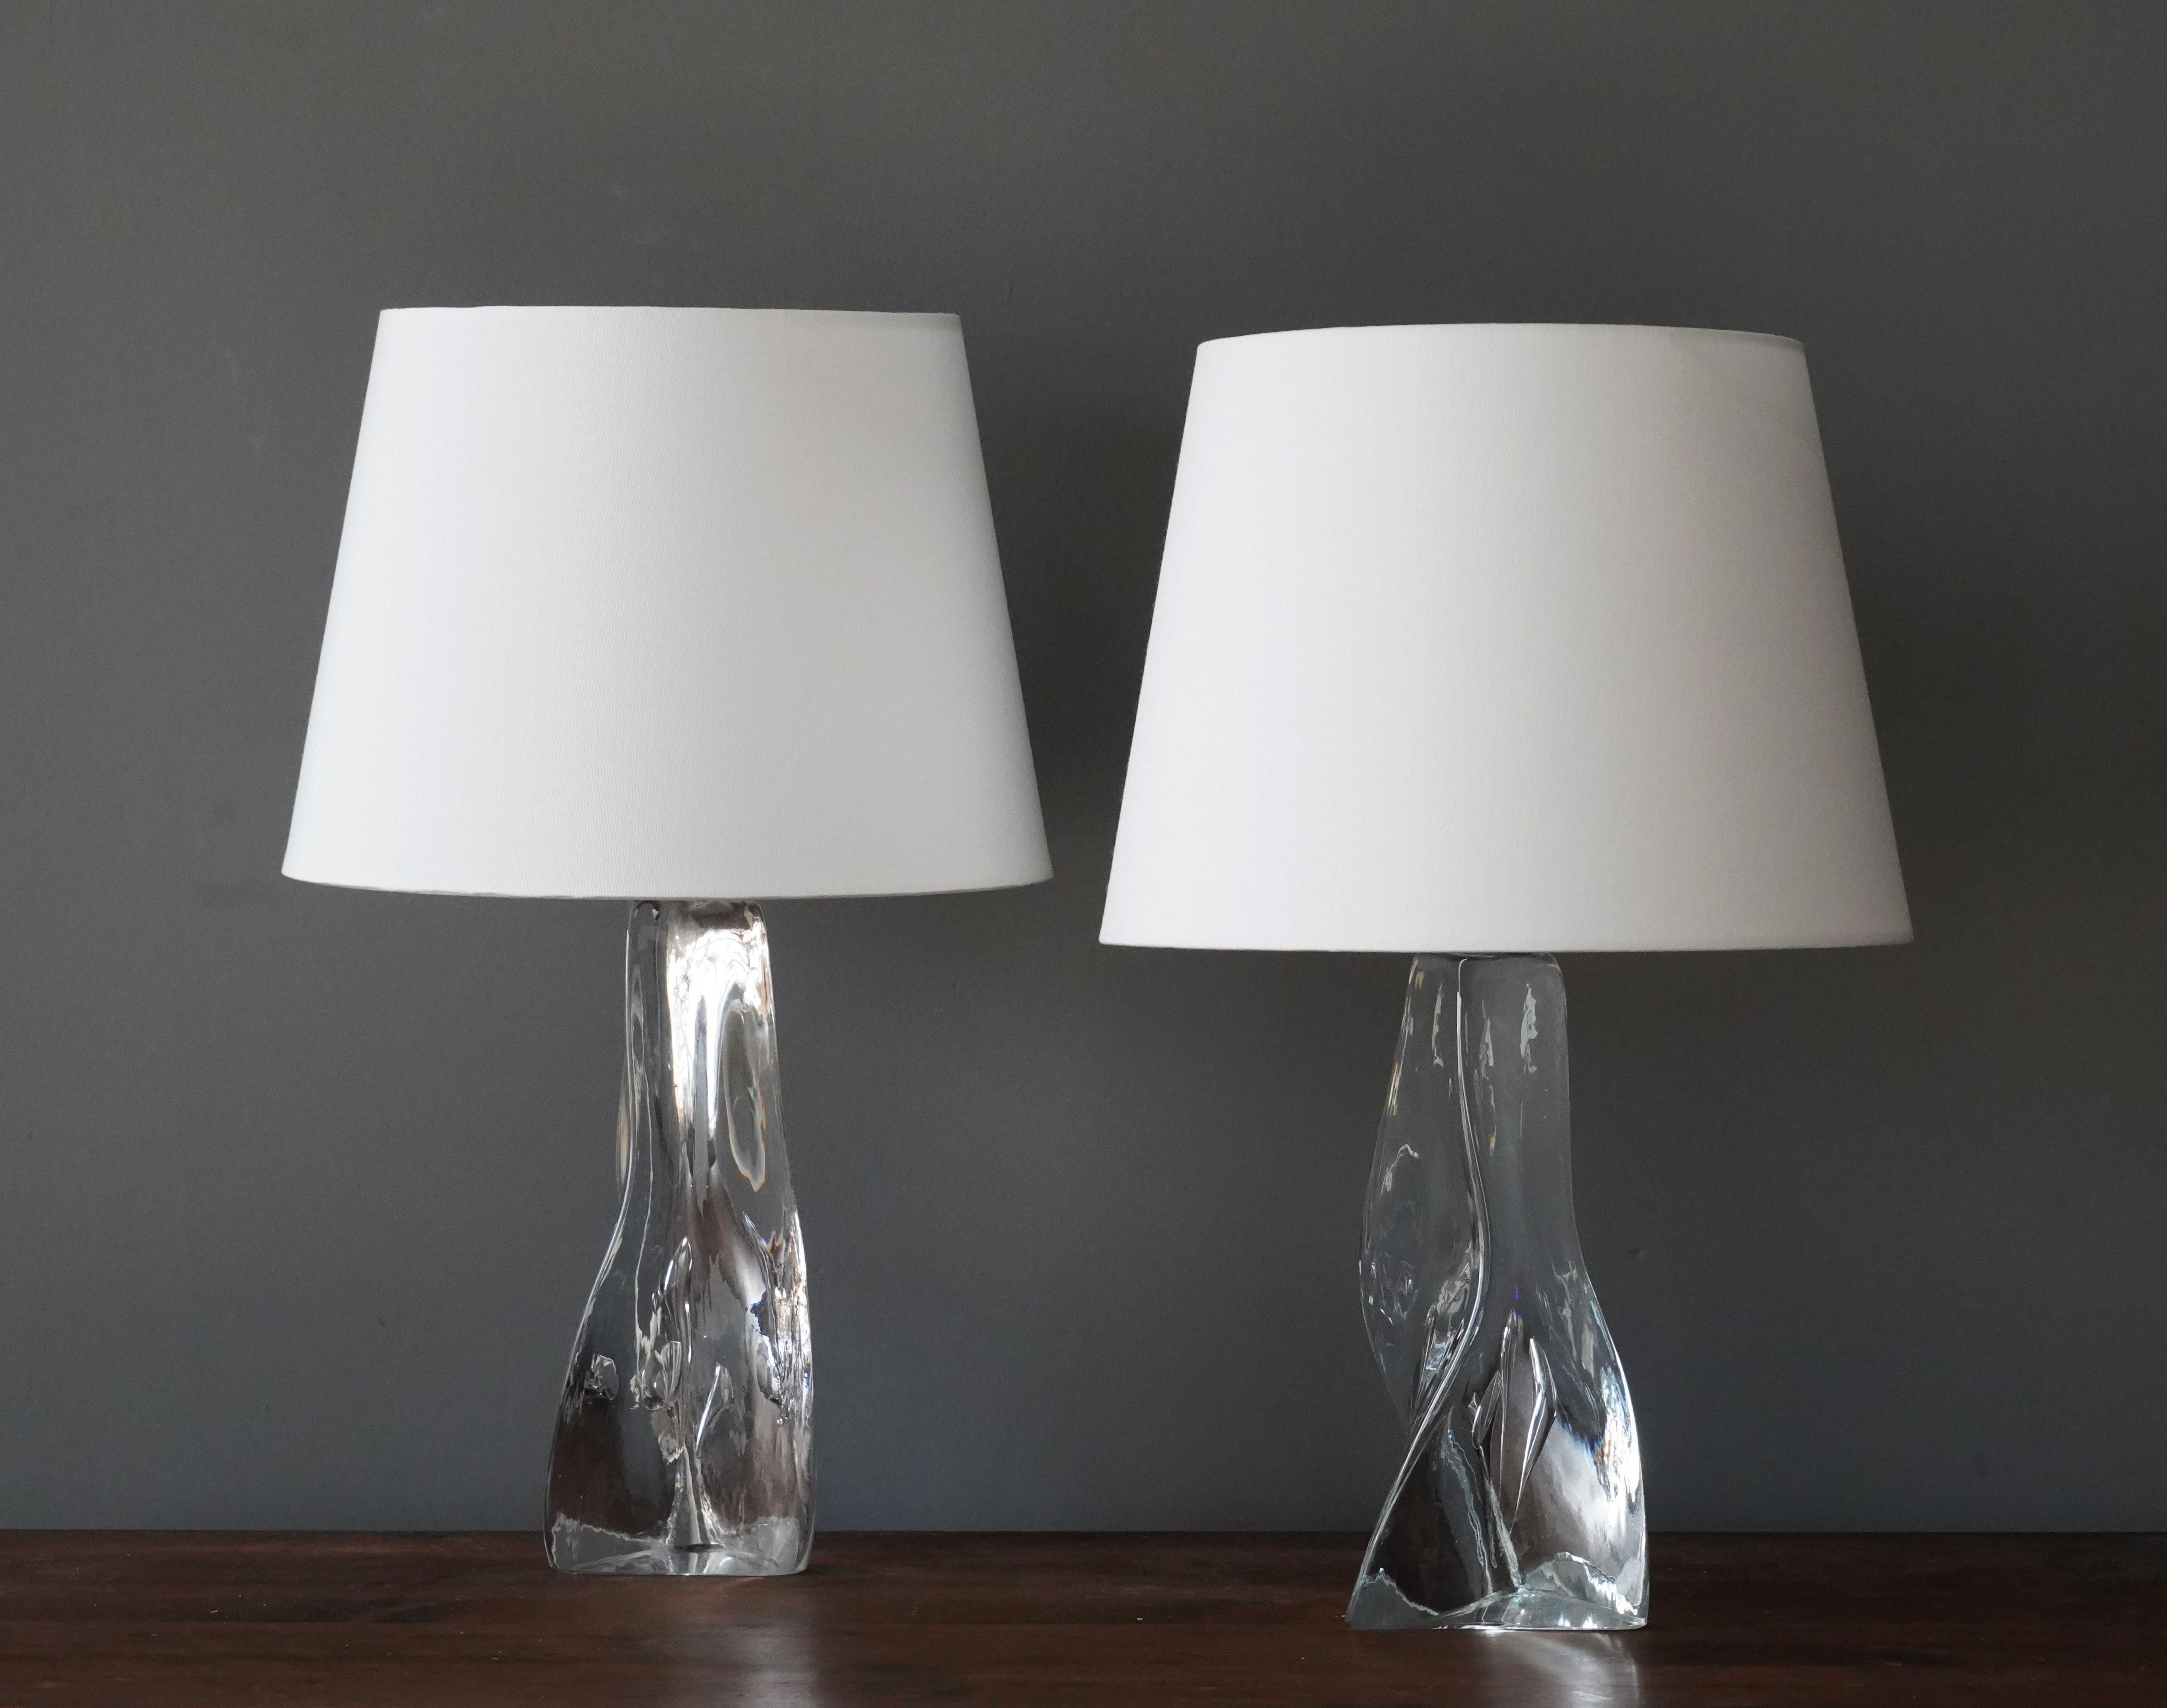 A pair of organic table lamps. Designed by Folke Walving for Målerås, Sweden, 1960s. Signed.

Sold without lampshades. Stated measurements excluding lampshades.

Other designers of the period include Paavo Tynell, Hans Bergström, Max Ingrand,